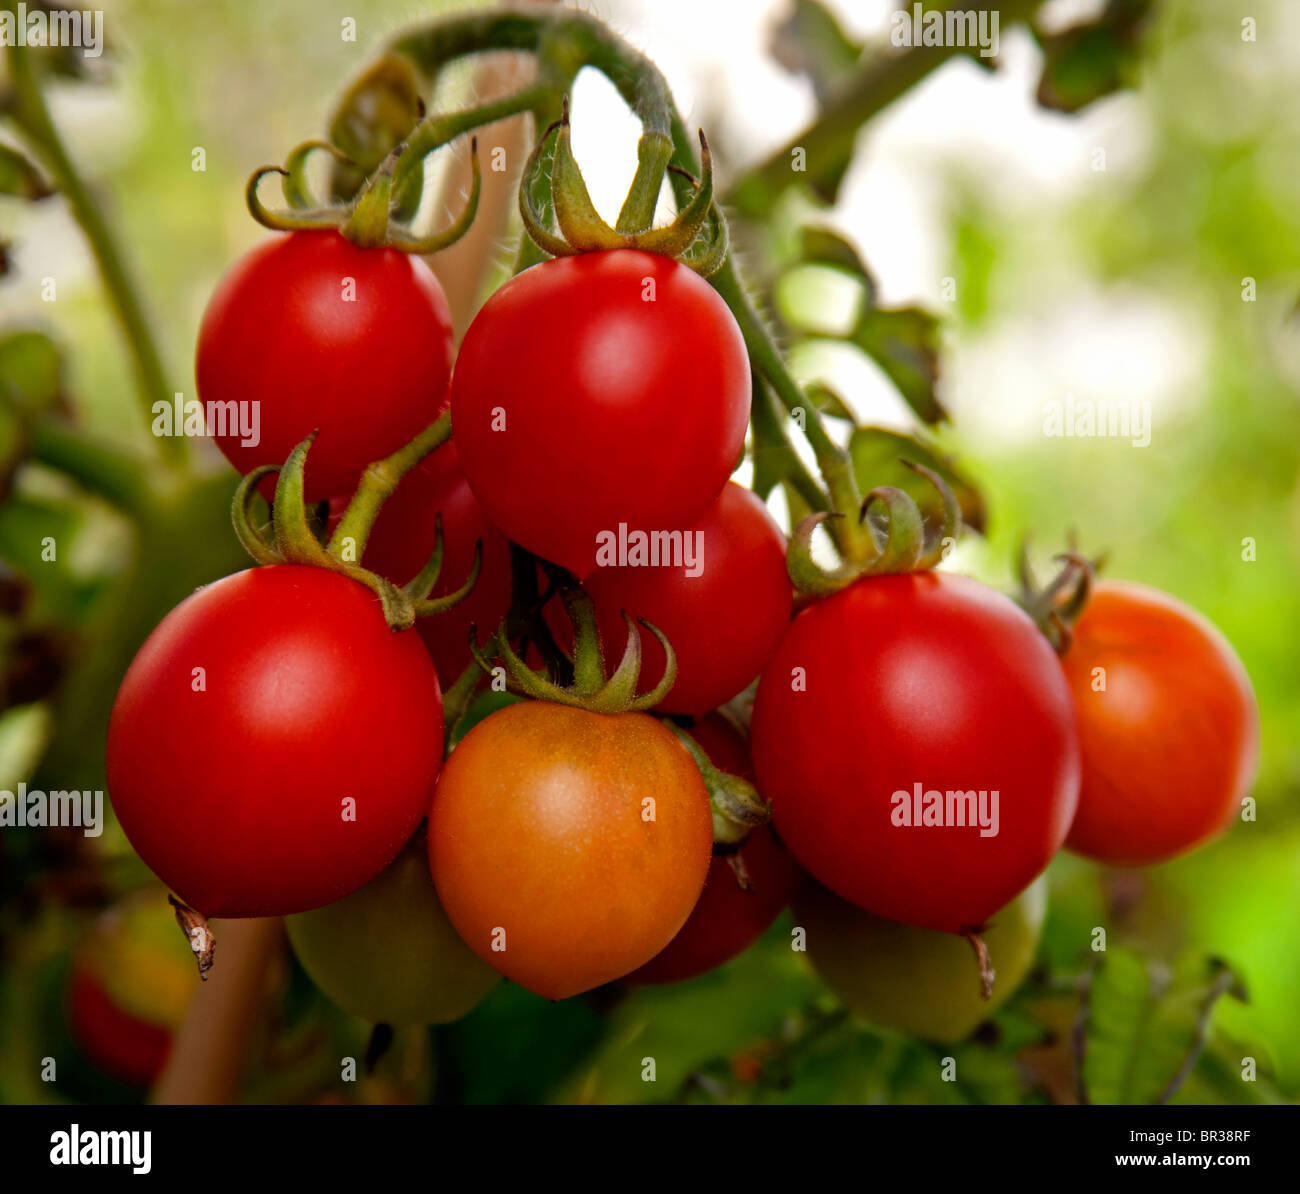 bunch of red ripe tomatoes Stock Photo